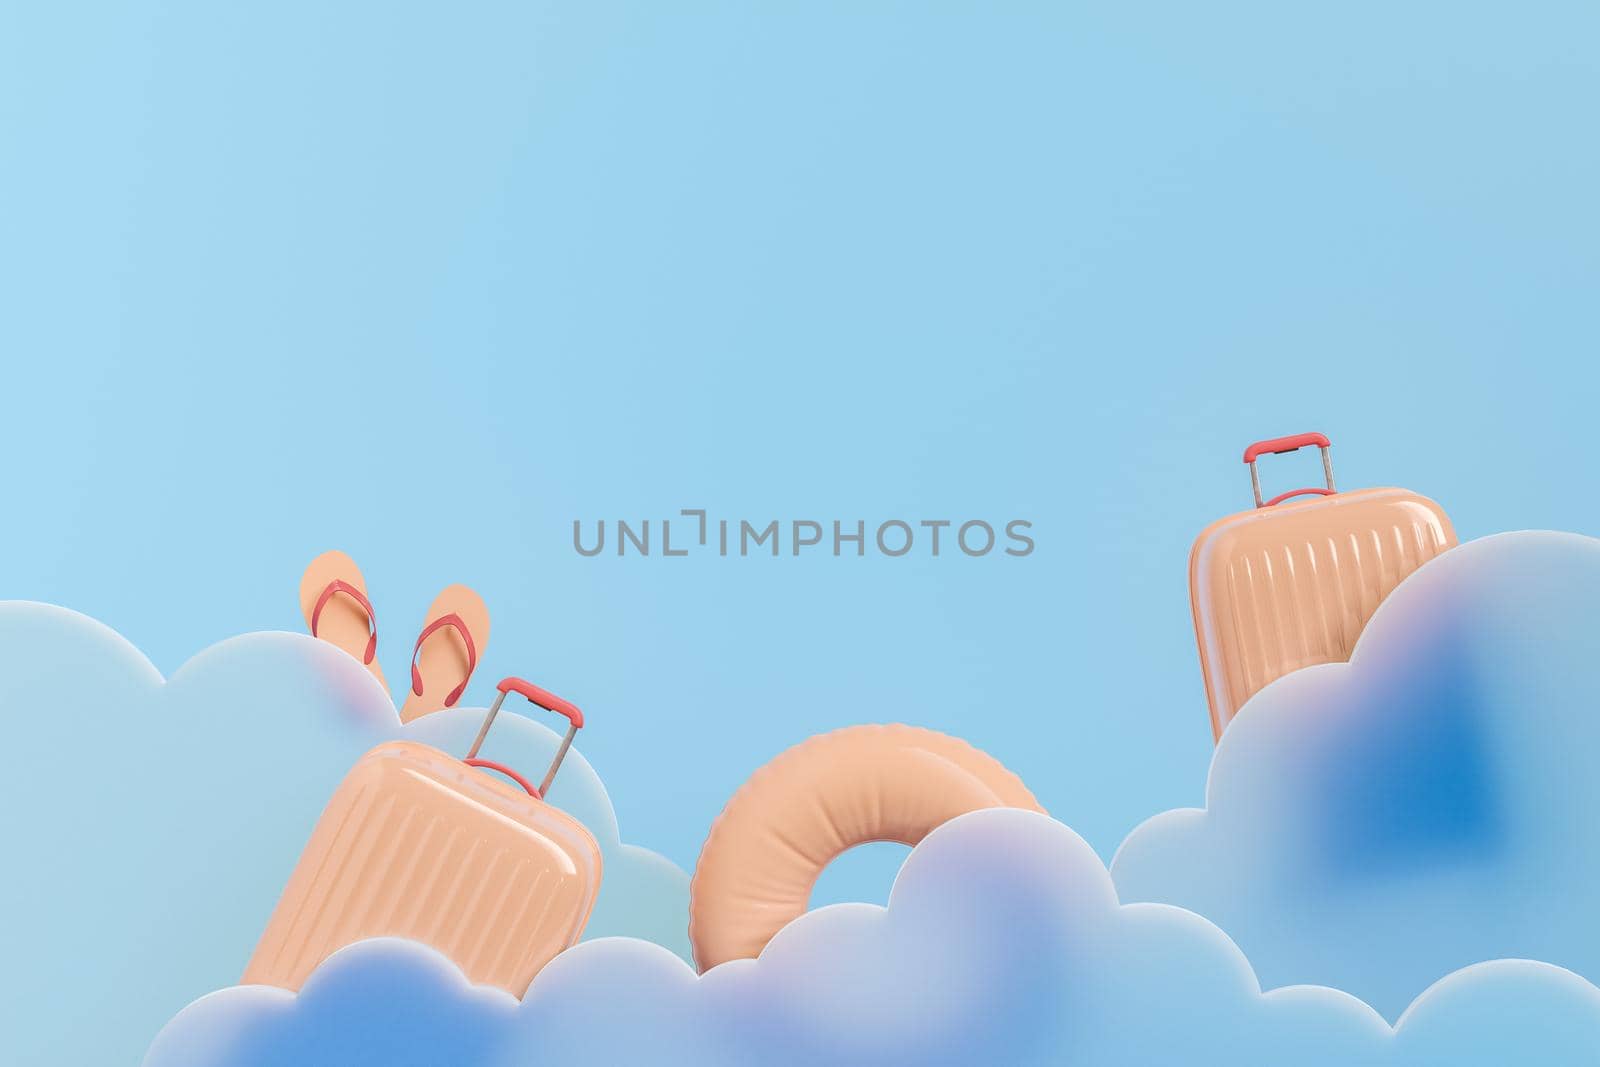 Creative 3D rendering with hard side suitcases with swim ring and flip flops amidst clouds against blue background showing concept of summer holidays